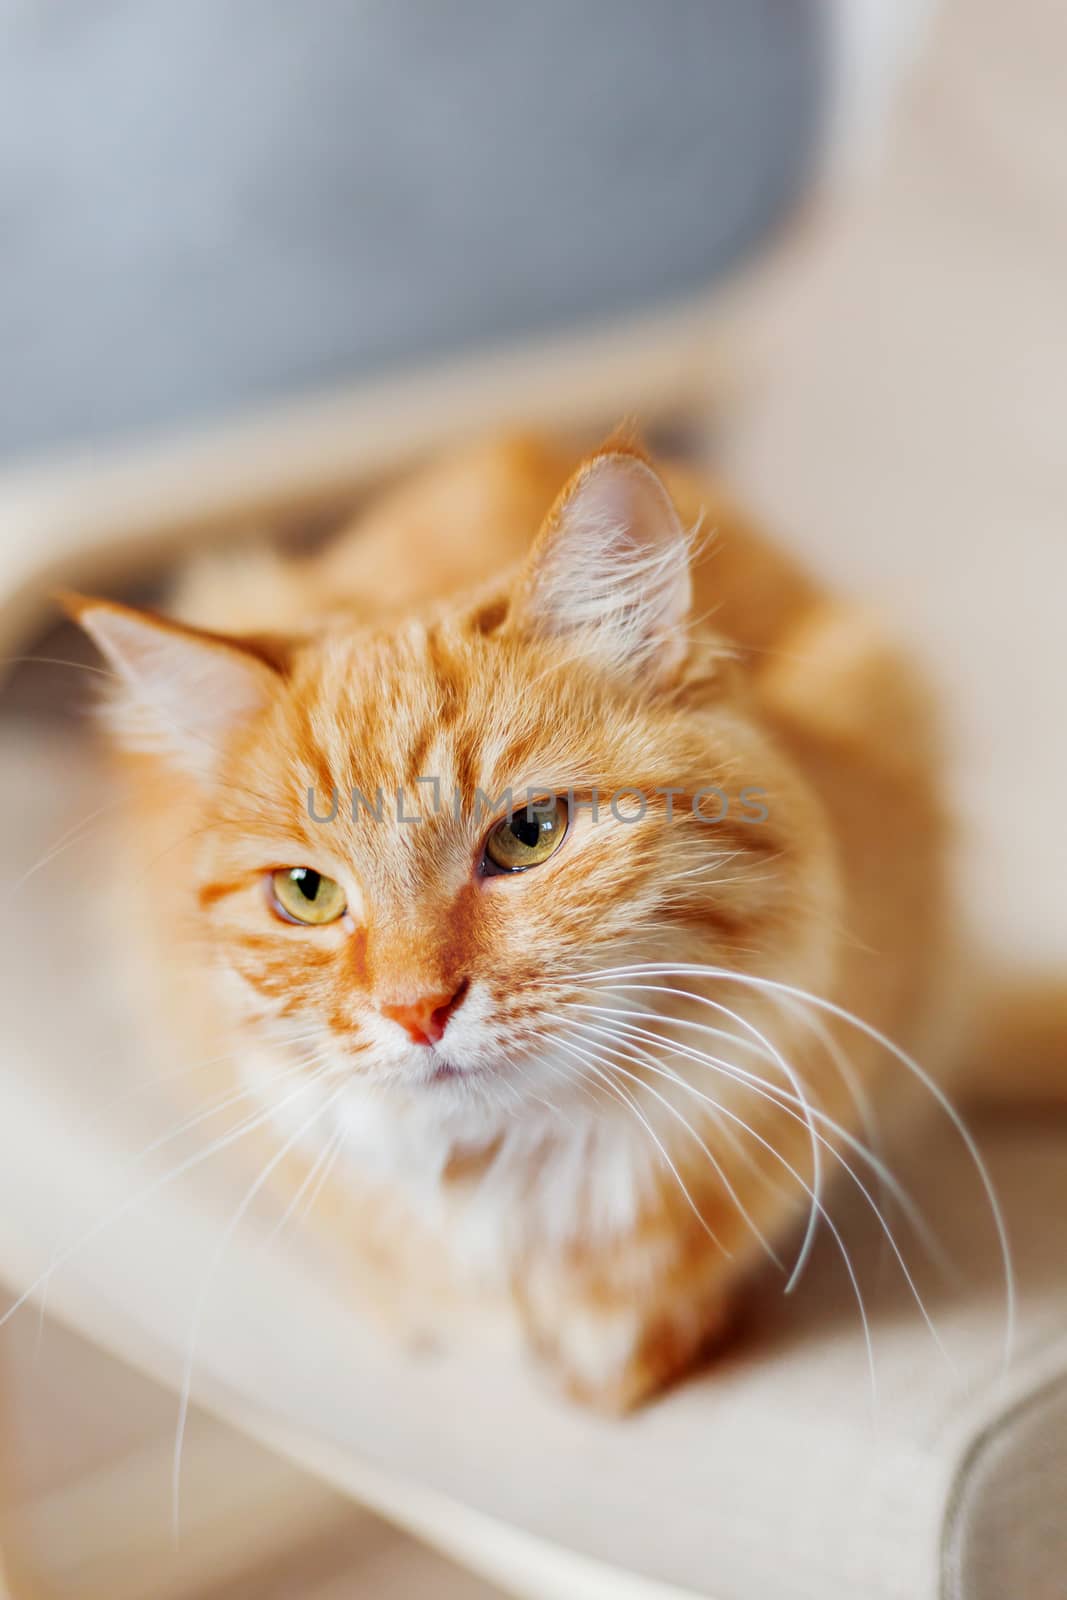 Close up portrait of cute ginger cat. Fluffy pet looks tired. Cozy home background.